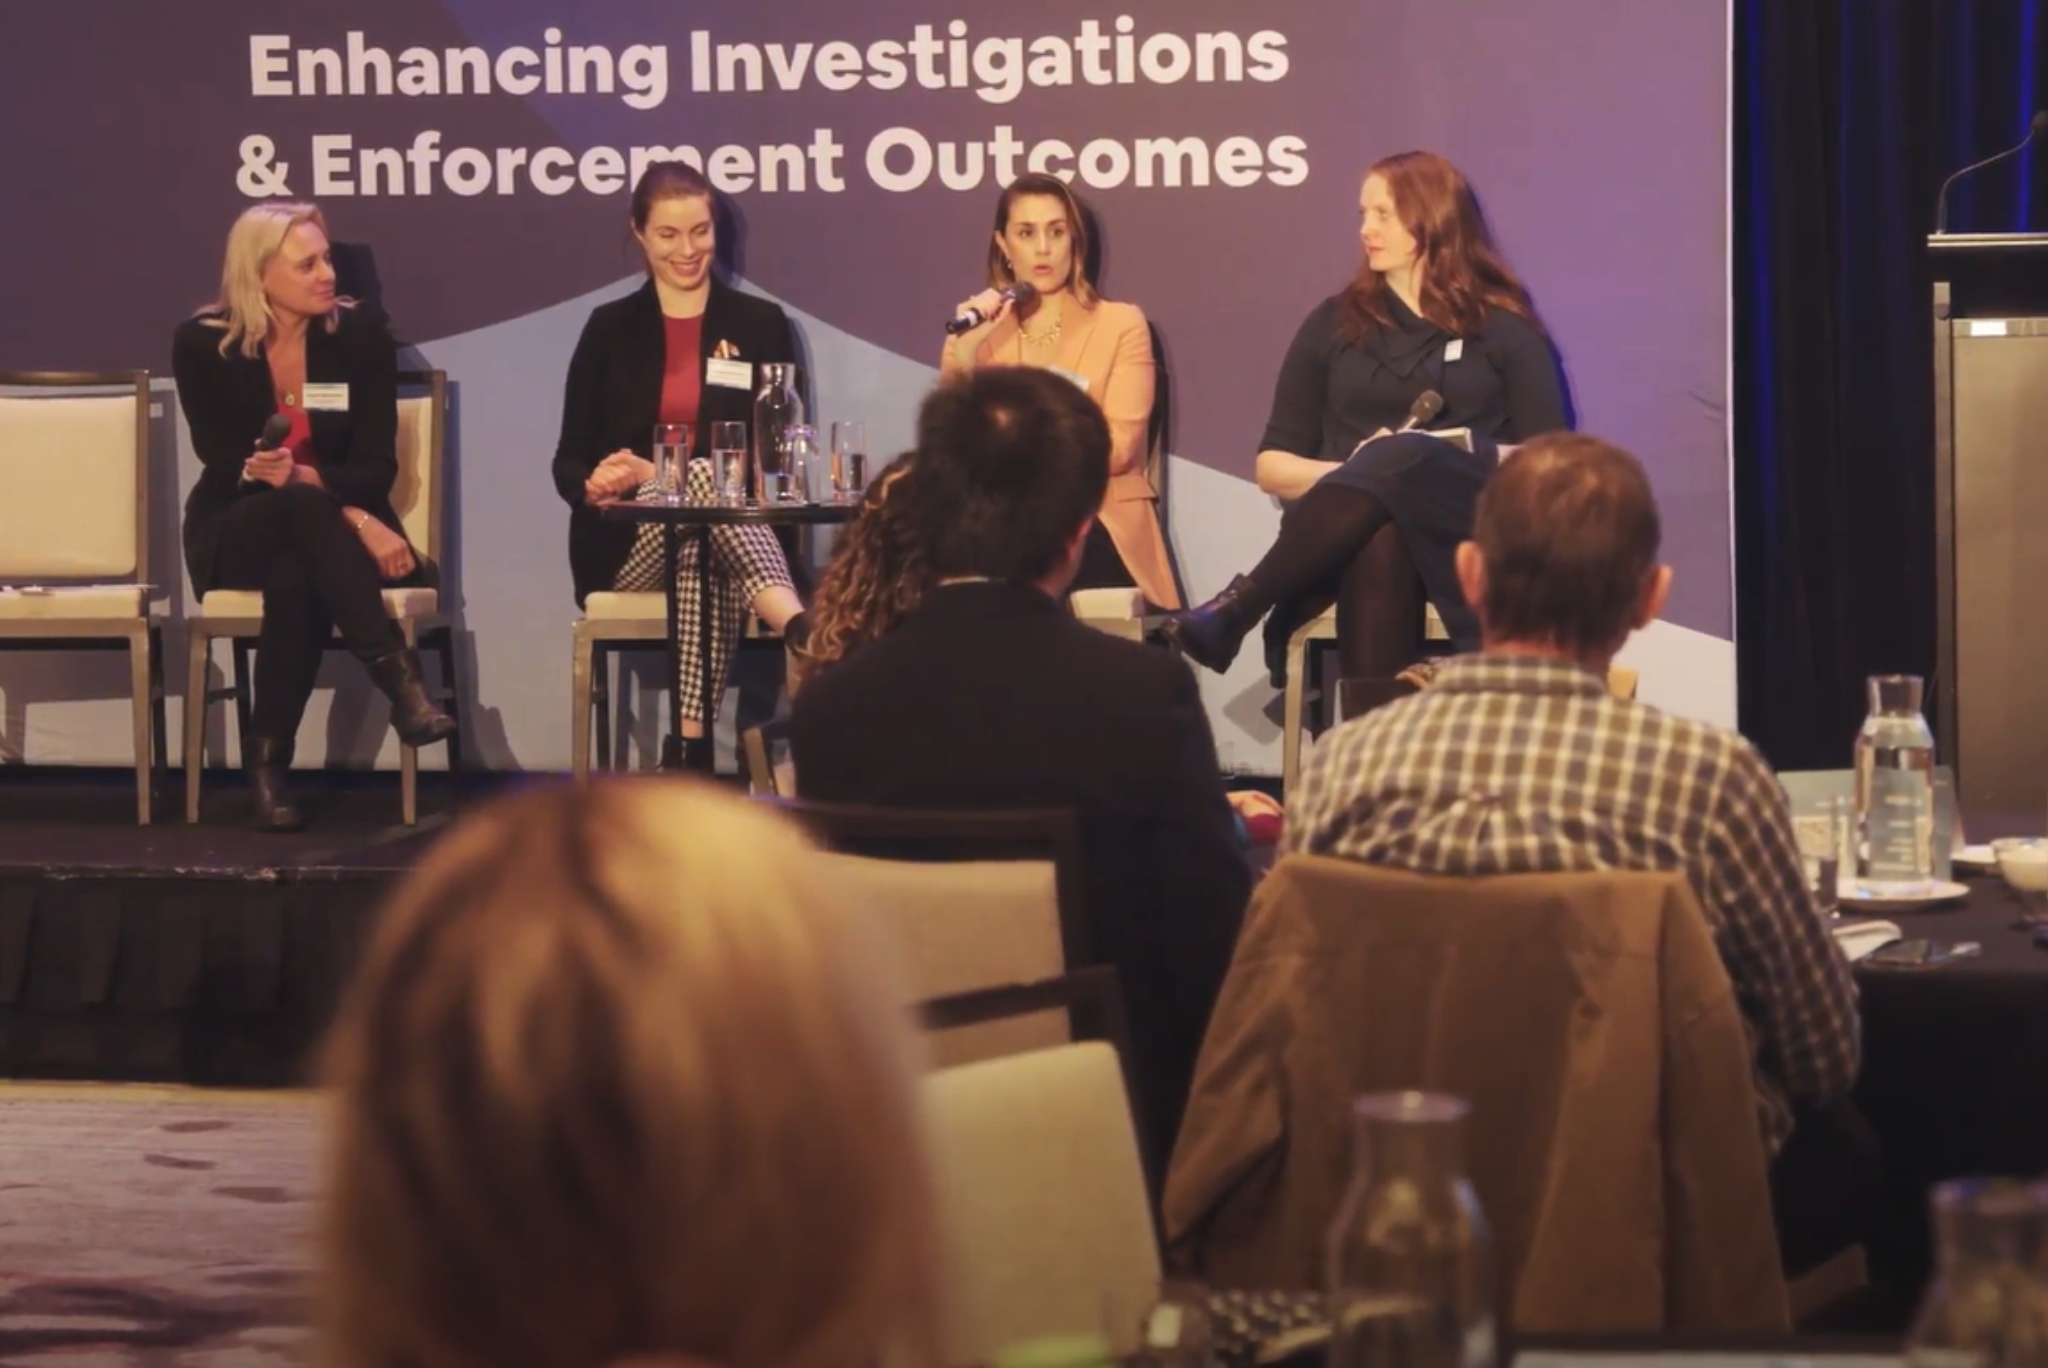 Enhancing Investigations – Panel Discussion 4 people